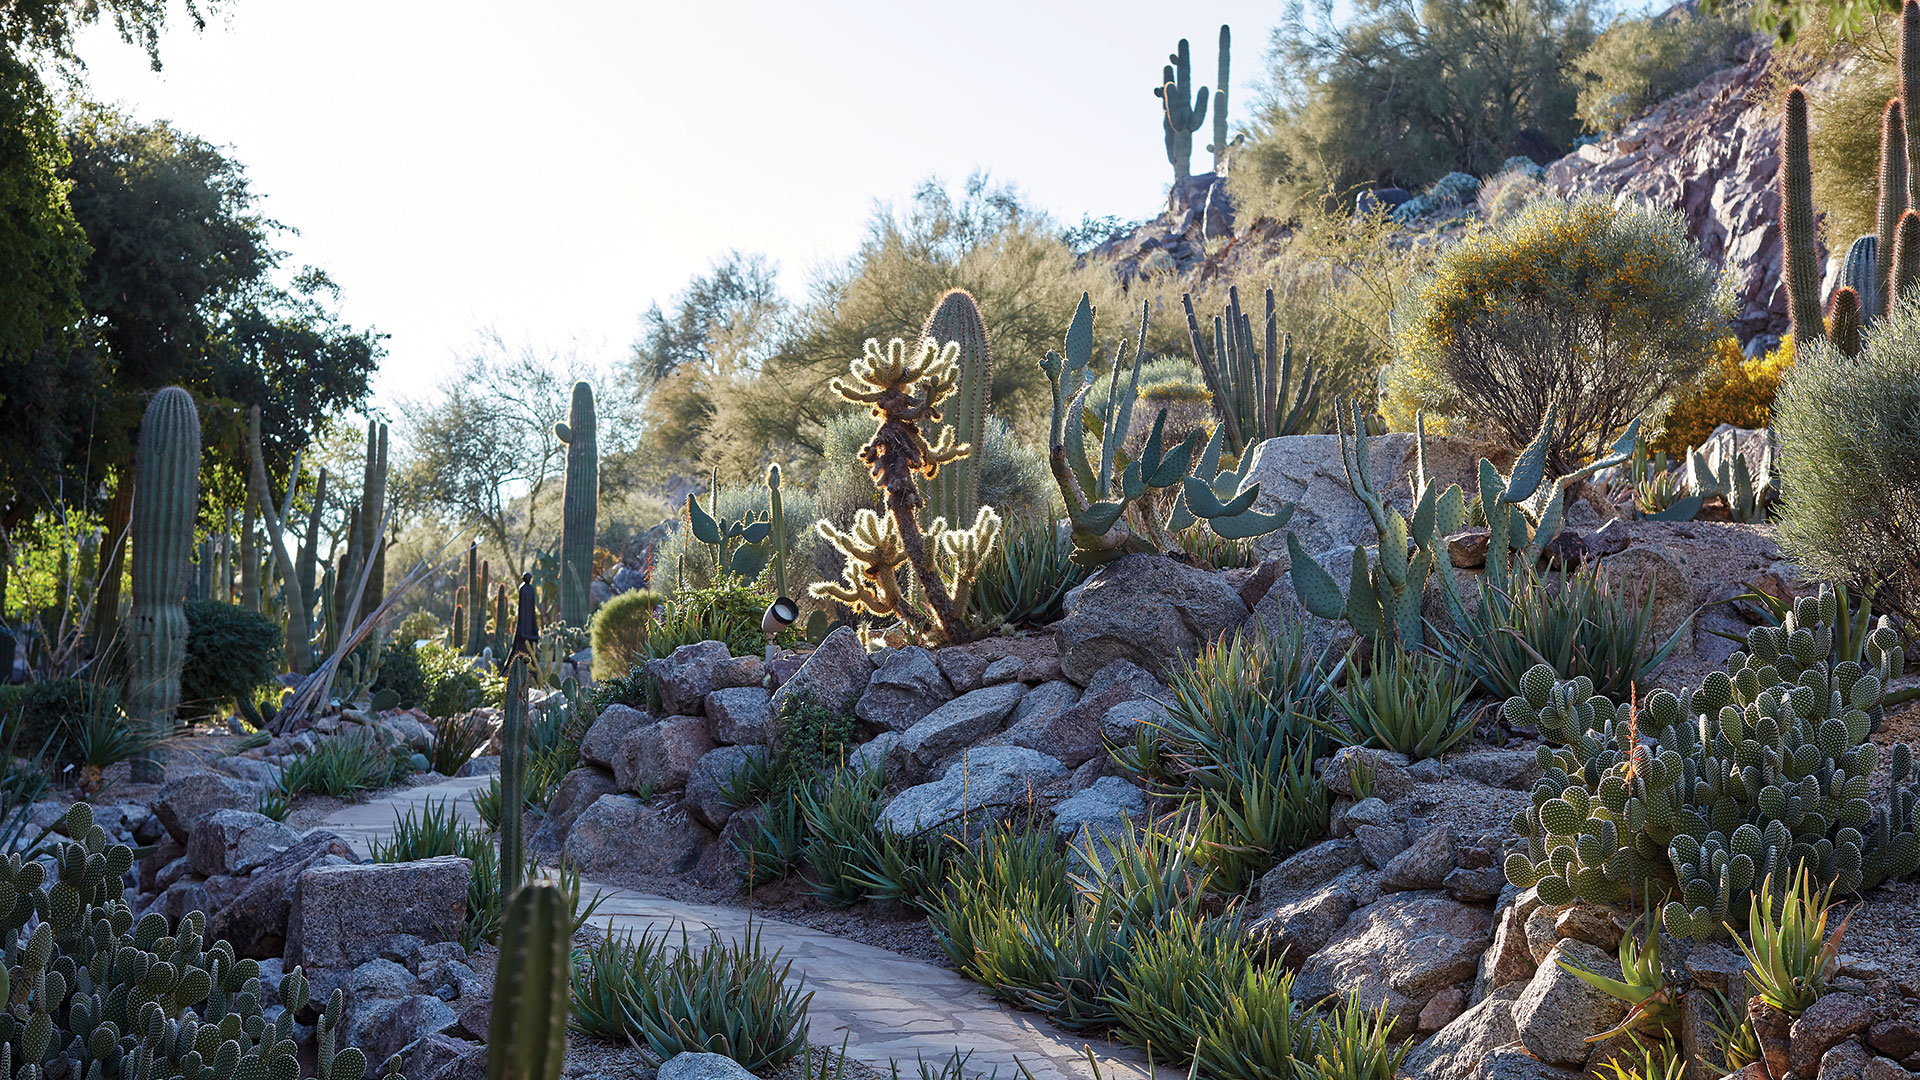 Walk through the cactus garden to the Phoenician<sup>®</sup> Hotel and restaurants.